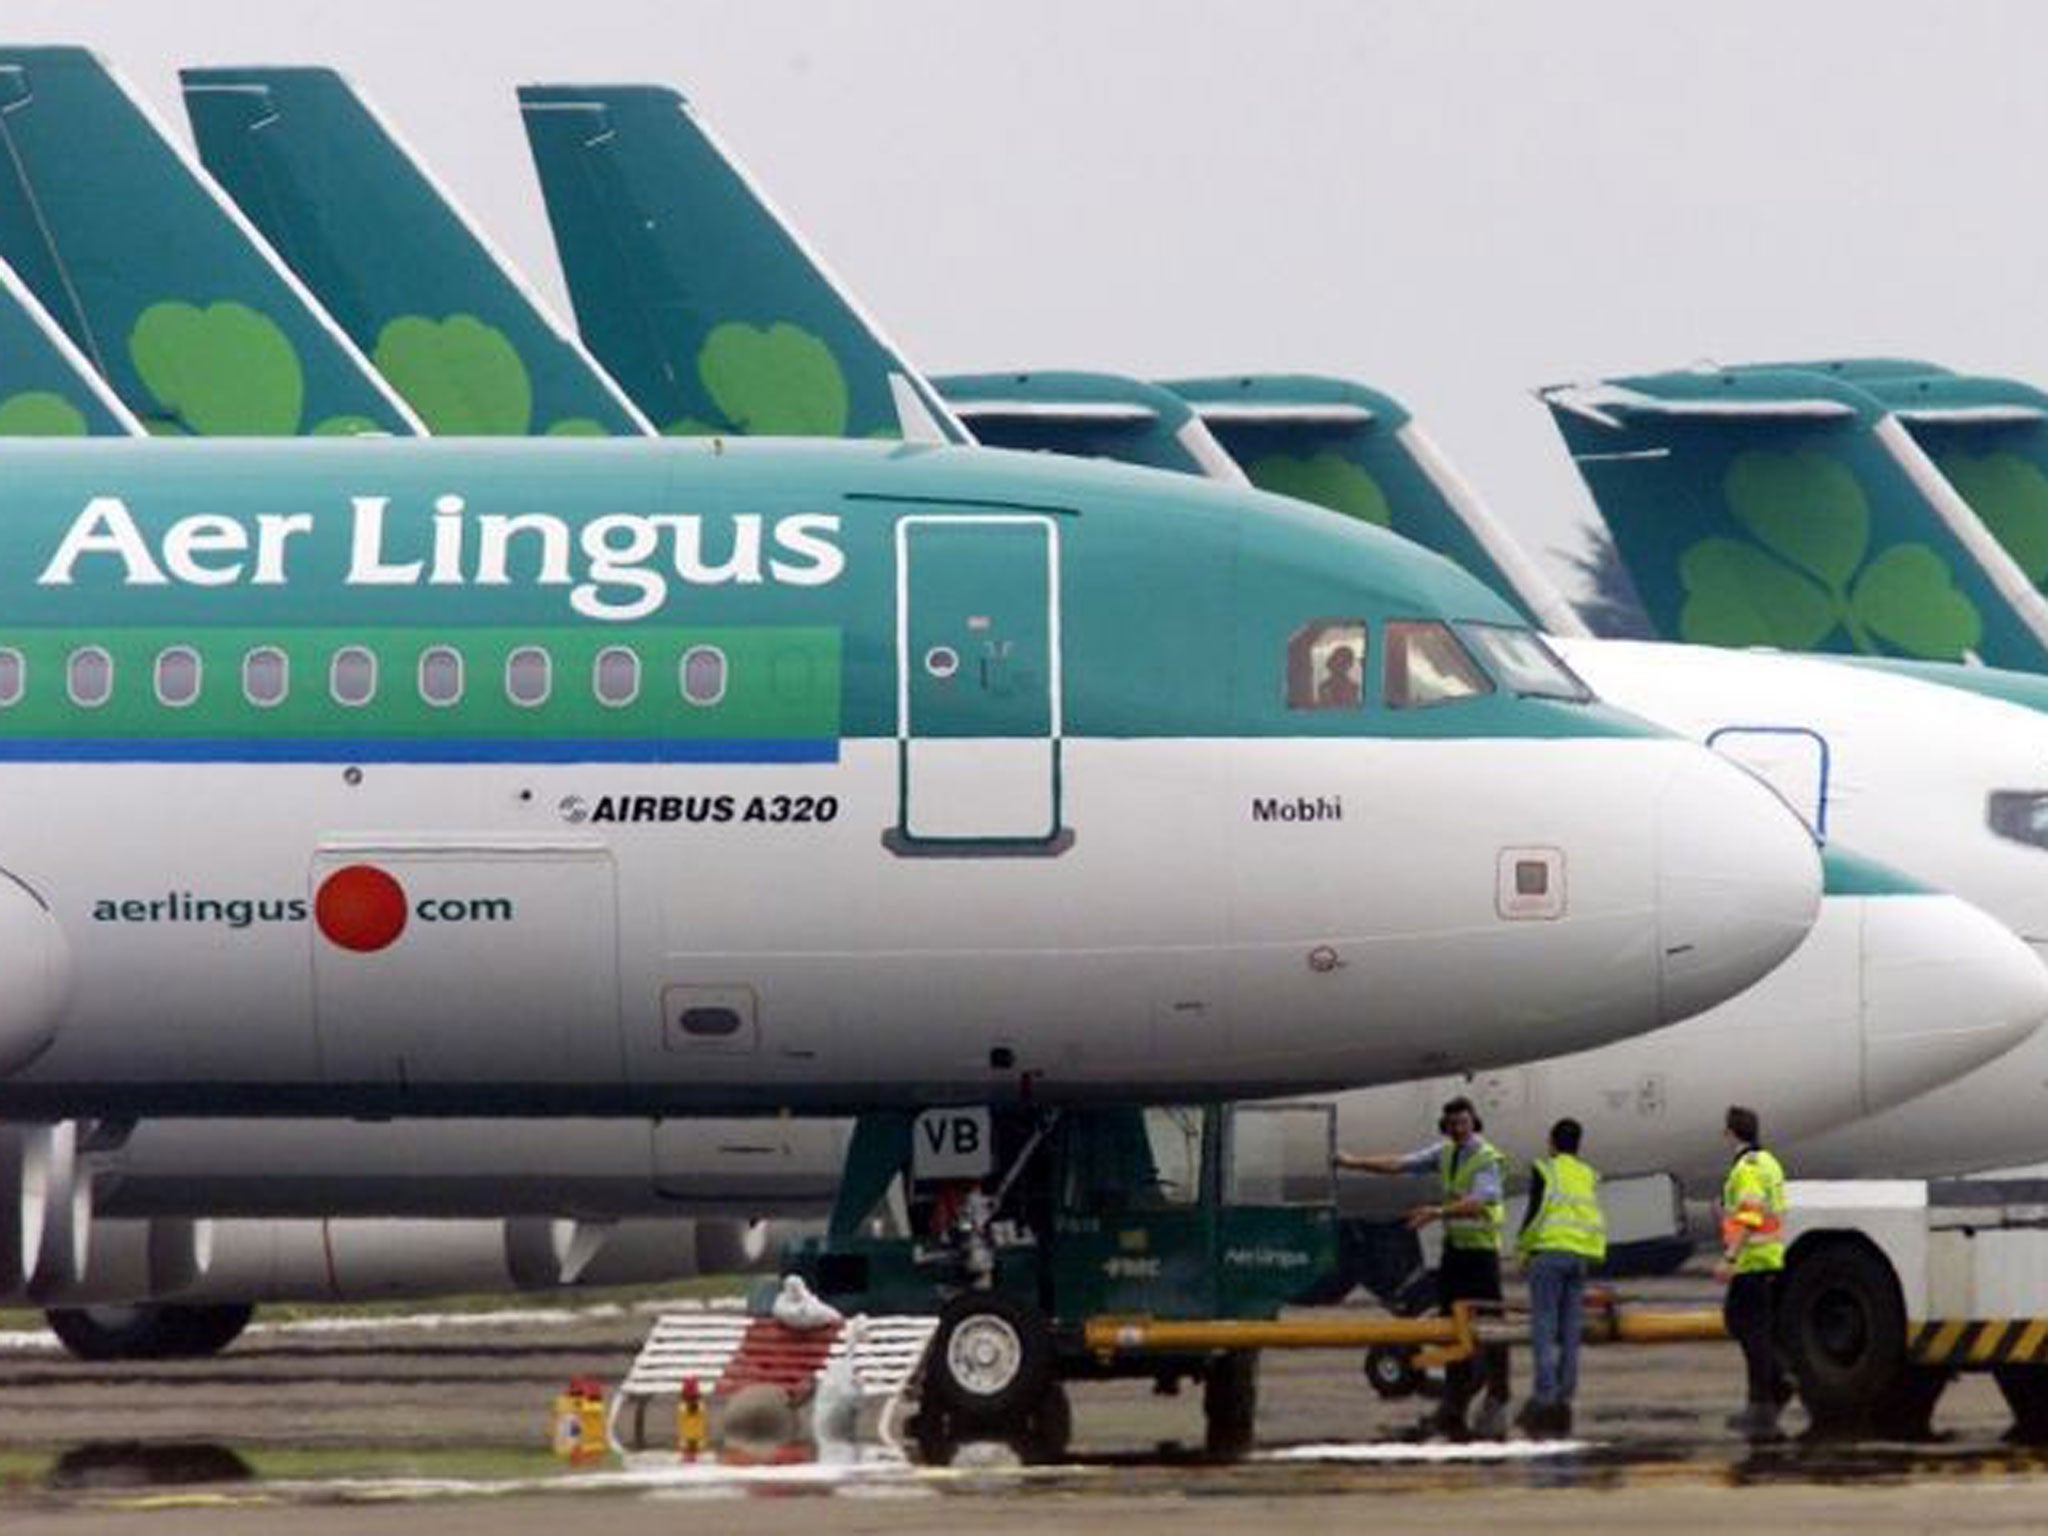 Ground crew are seen parking an Aer Lingus Airbus A320 away from the passenger terminals at Dublin Airport in 2002